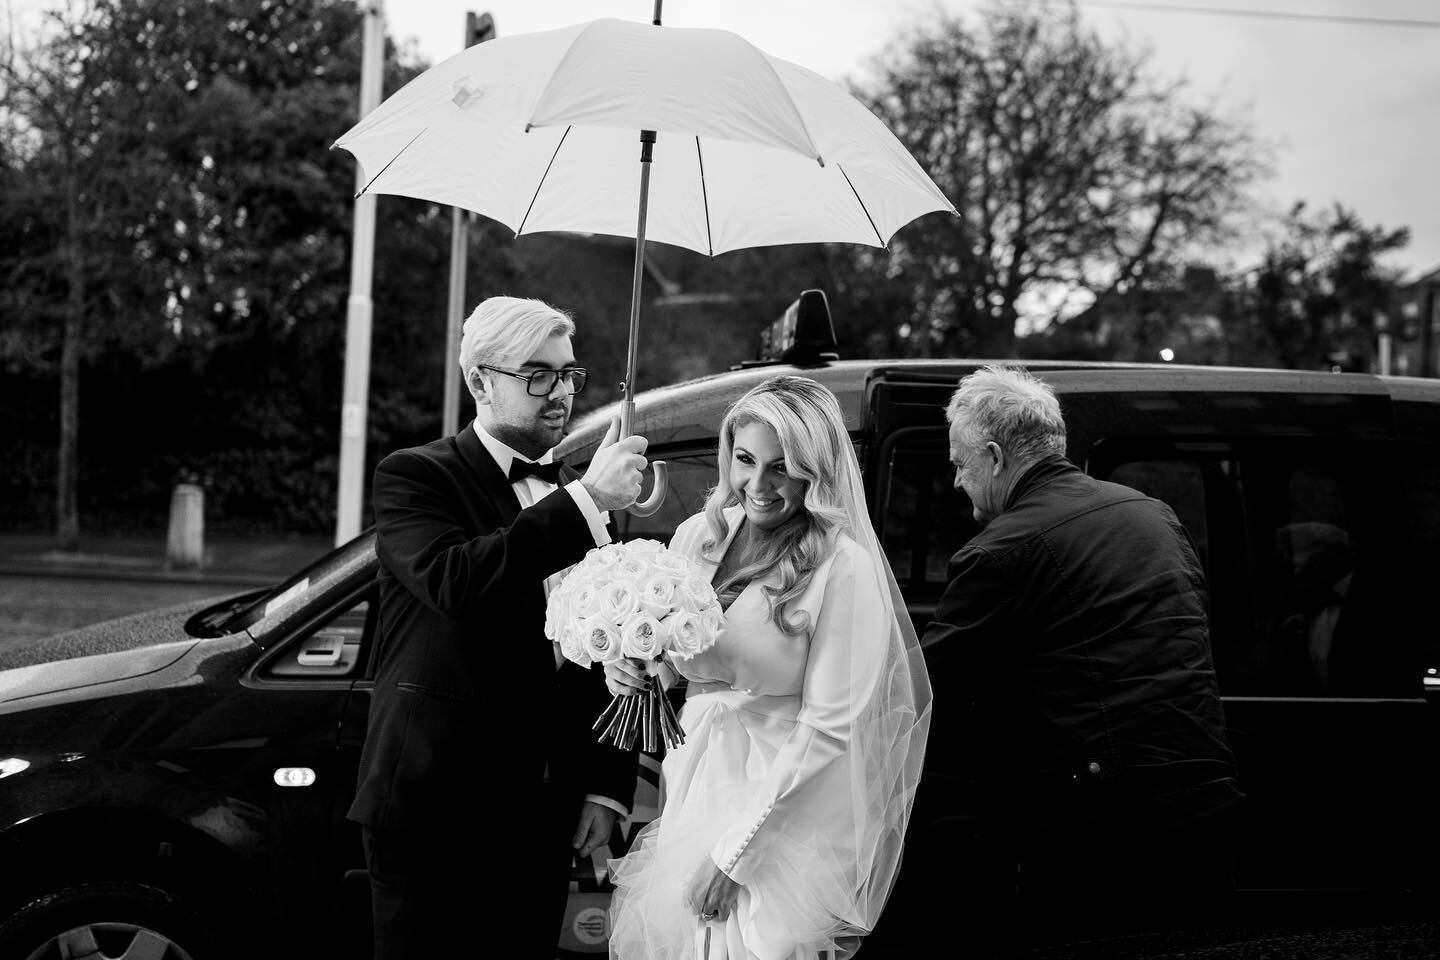 Katie &amp; Adam 🖤
What a day!! These two had such a special celebration with their close family and friends, days like this will be worth waiting for again!